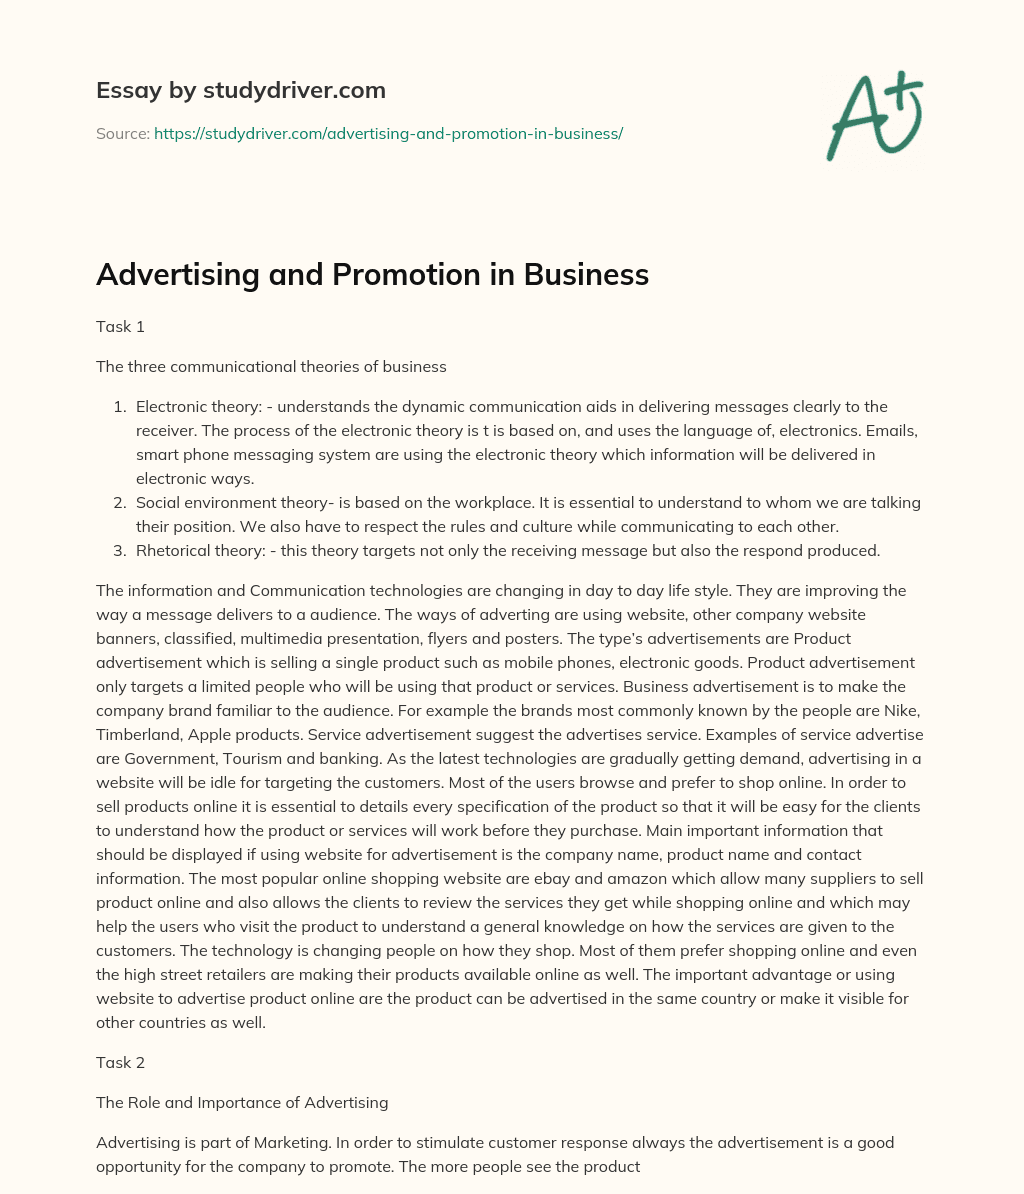 Advertising and Promotion in Business essay